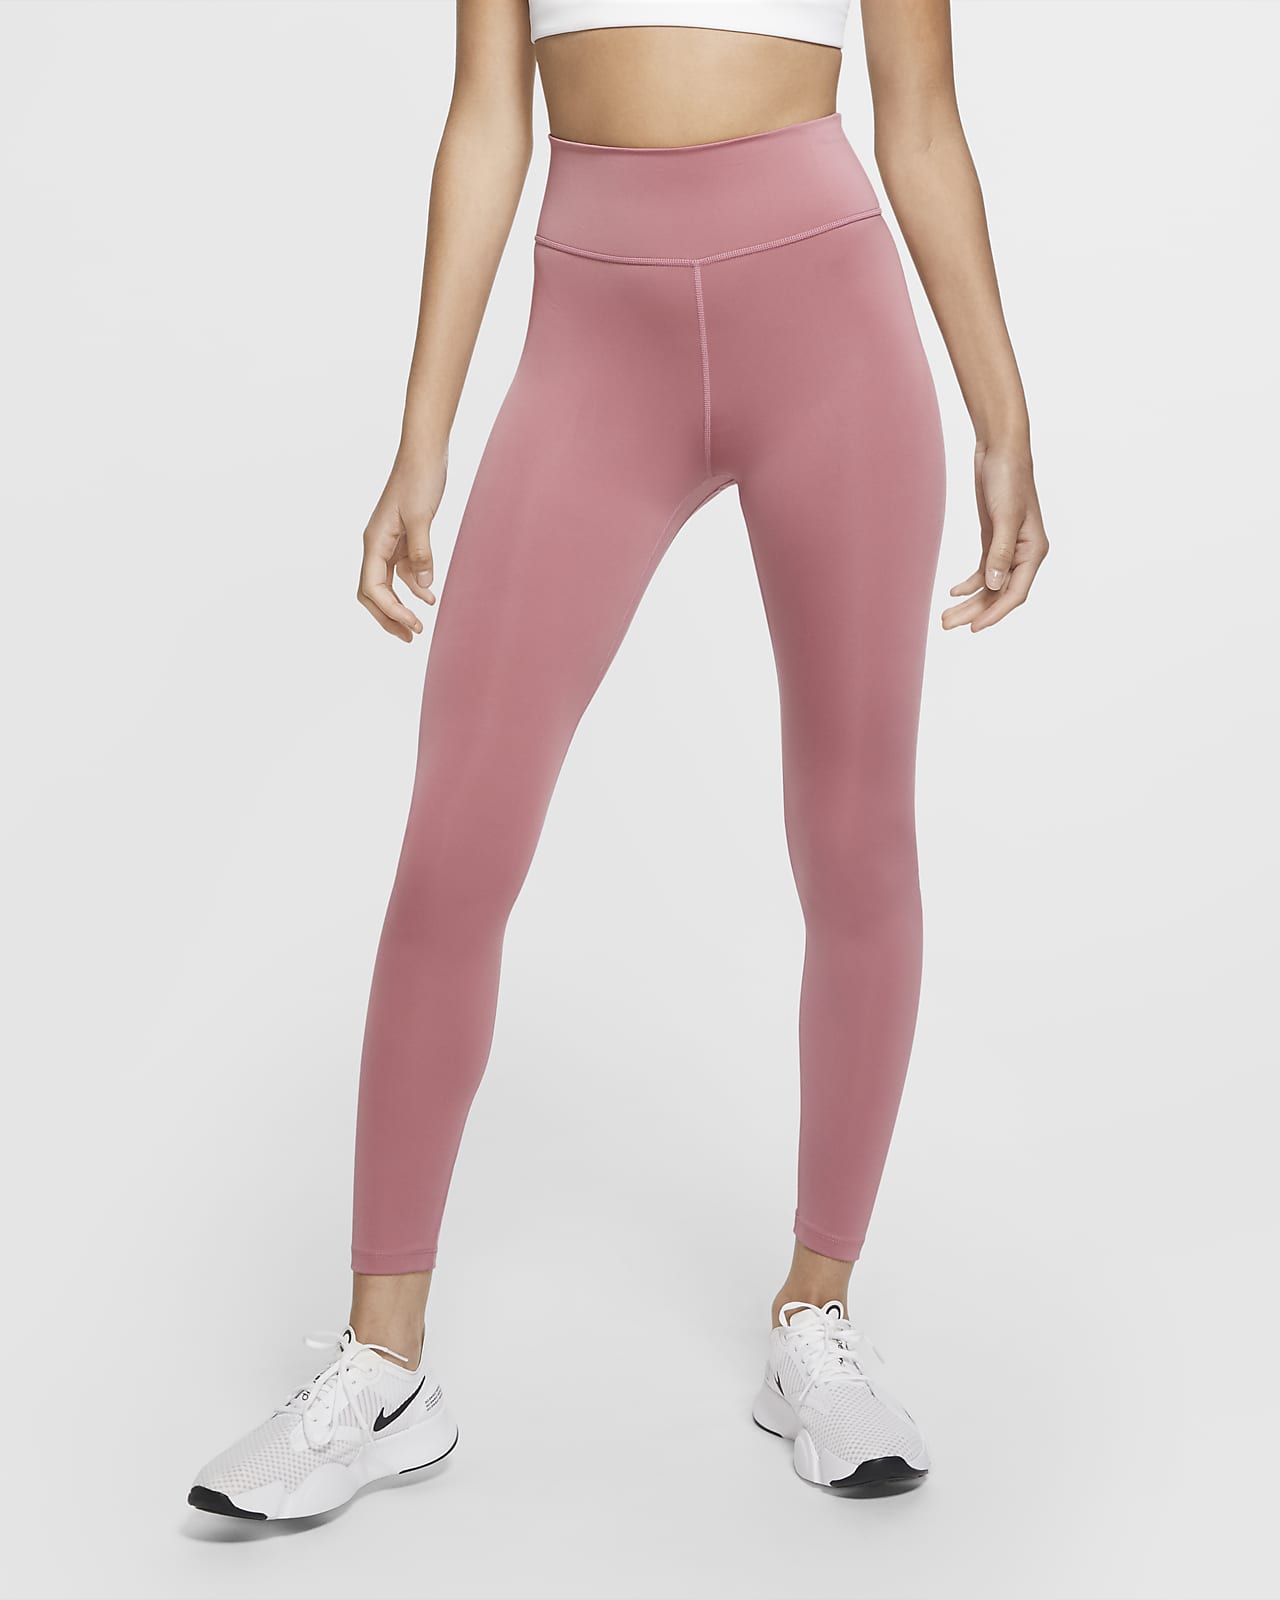 nike one women's tights